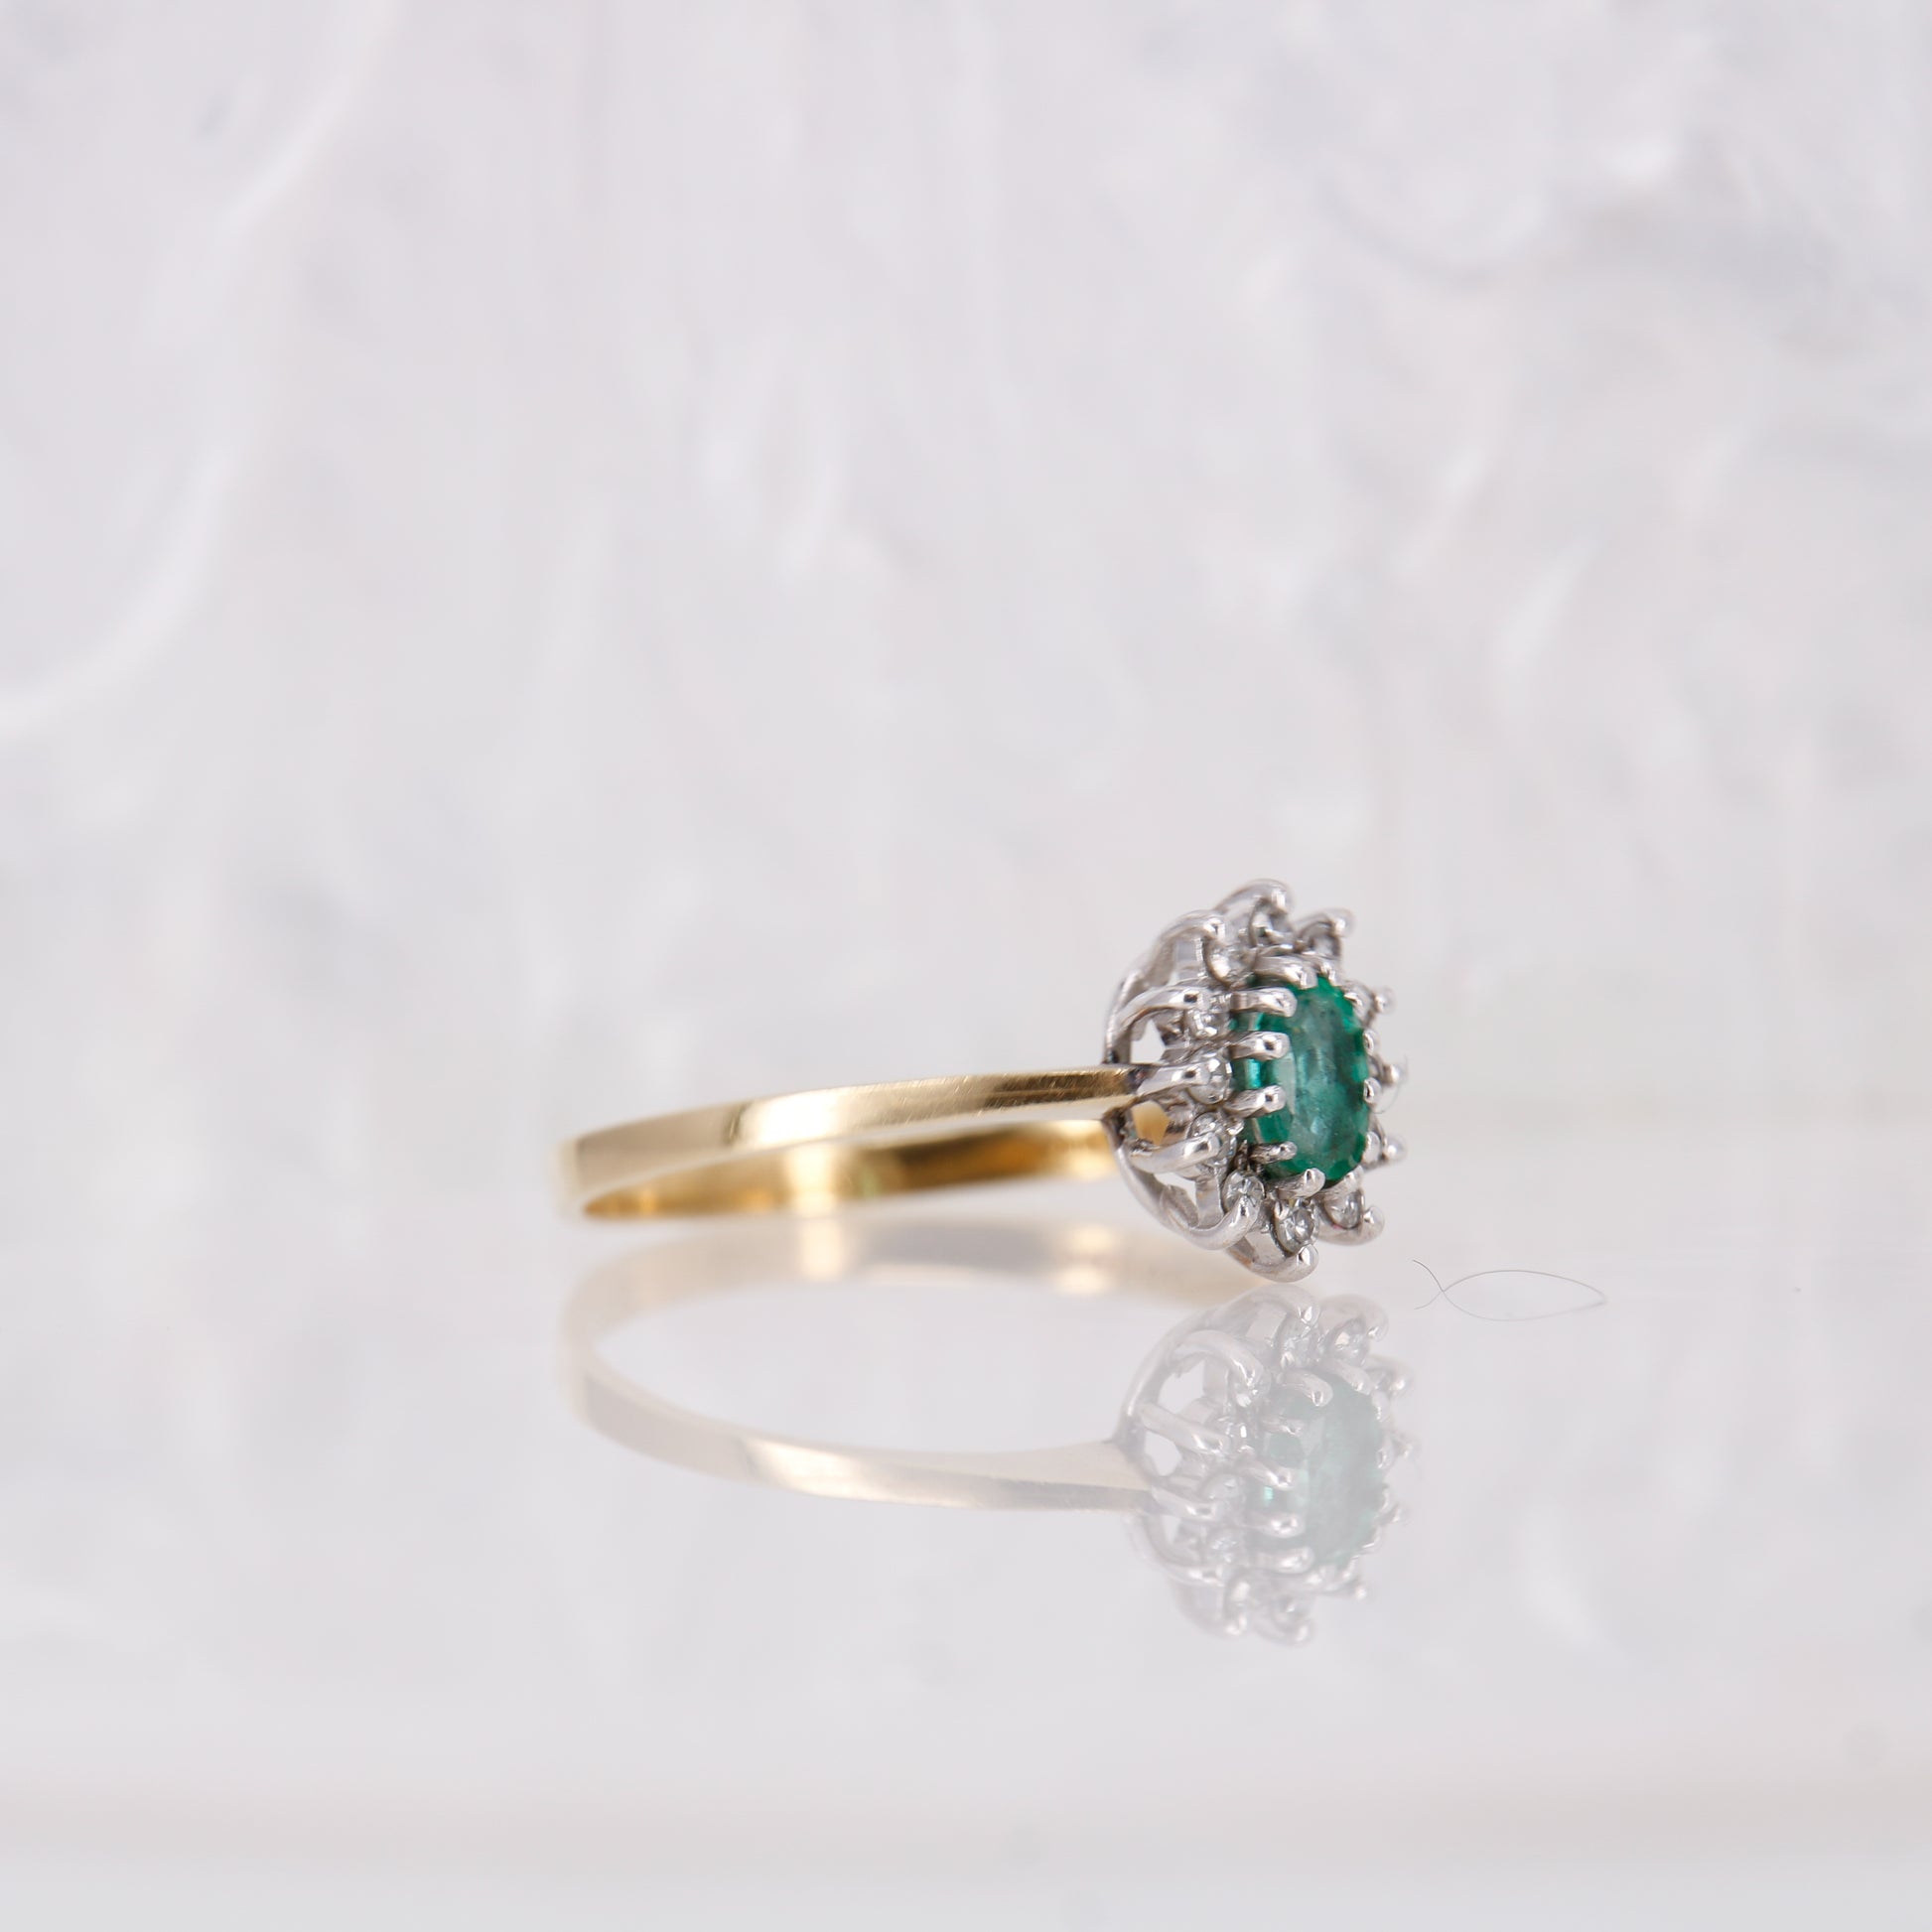 Secondhand Vintage 18ct Emerald and Diamond Ring. Oval cut emerald surrounded by a halo of diamonds.